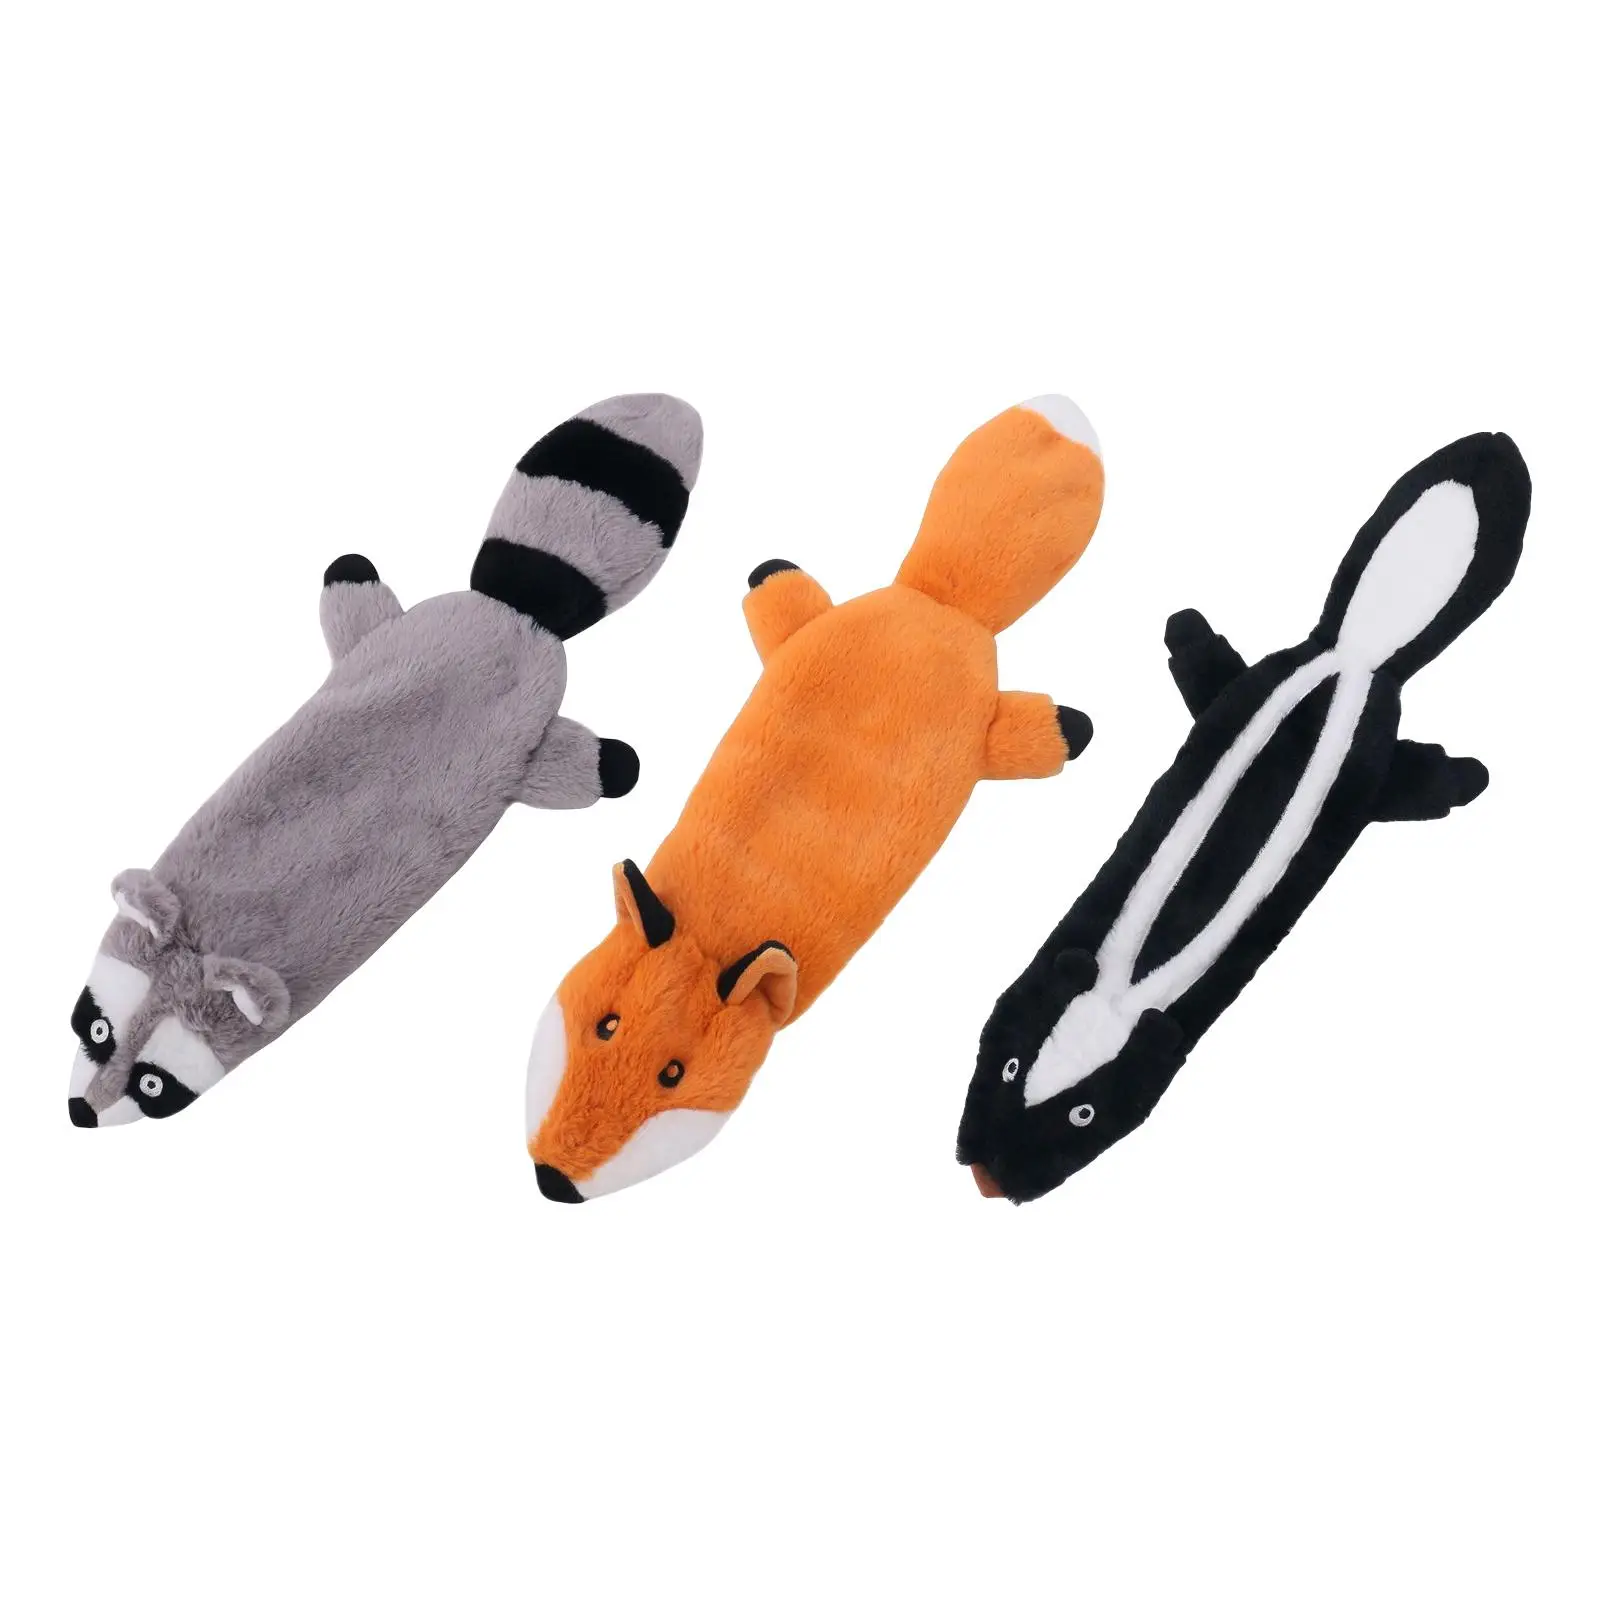 Dog Squeaky Toys Small Dogs Interactive Furniture Protector Soft Funny Plush Dog